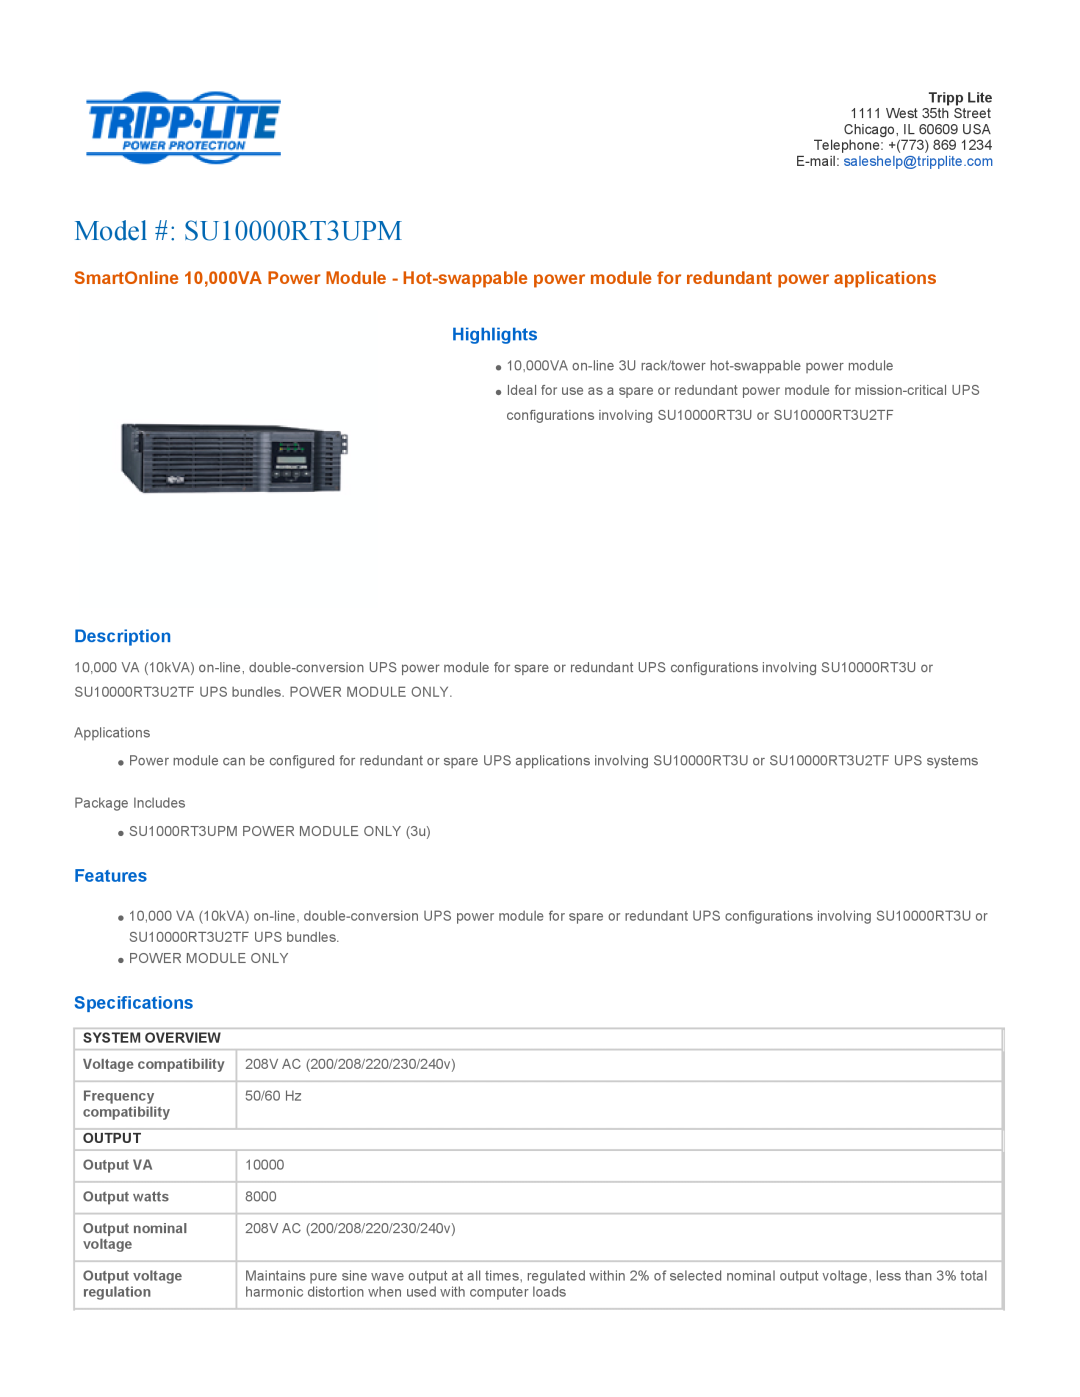 Tripp Lite SU10000RT3UPM specifications Highlights, Description, Features, Specifications, System Overview, Output 